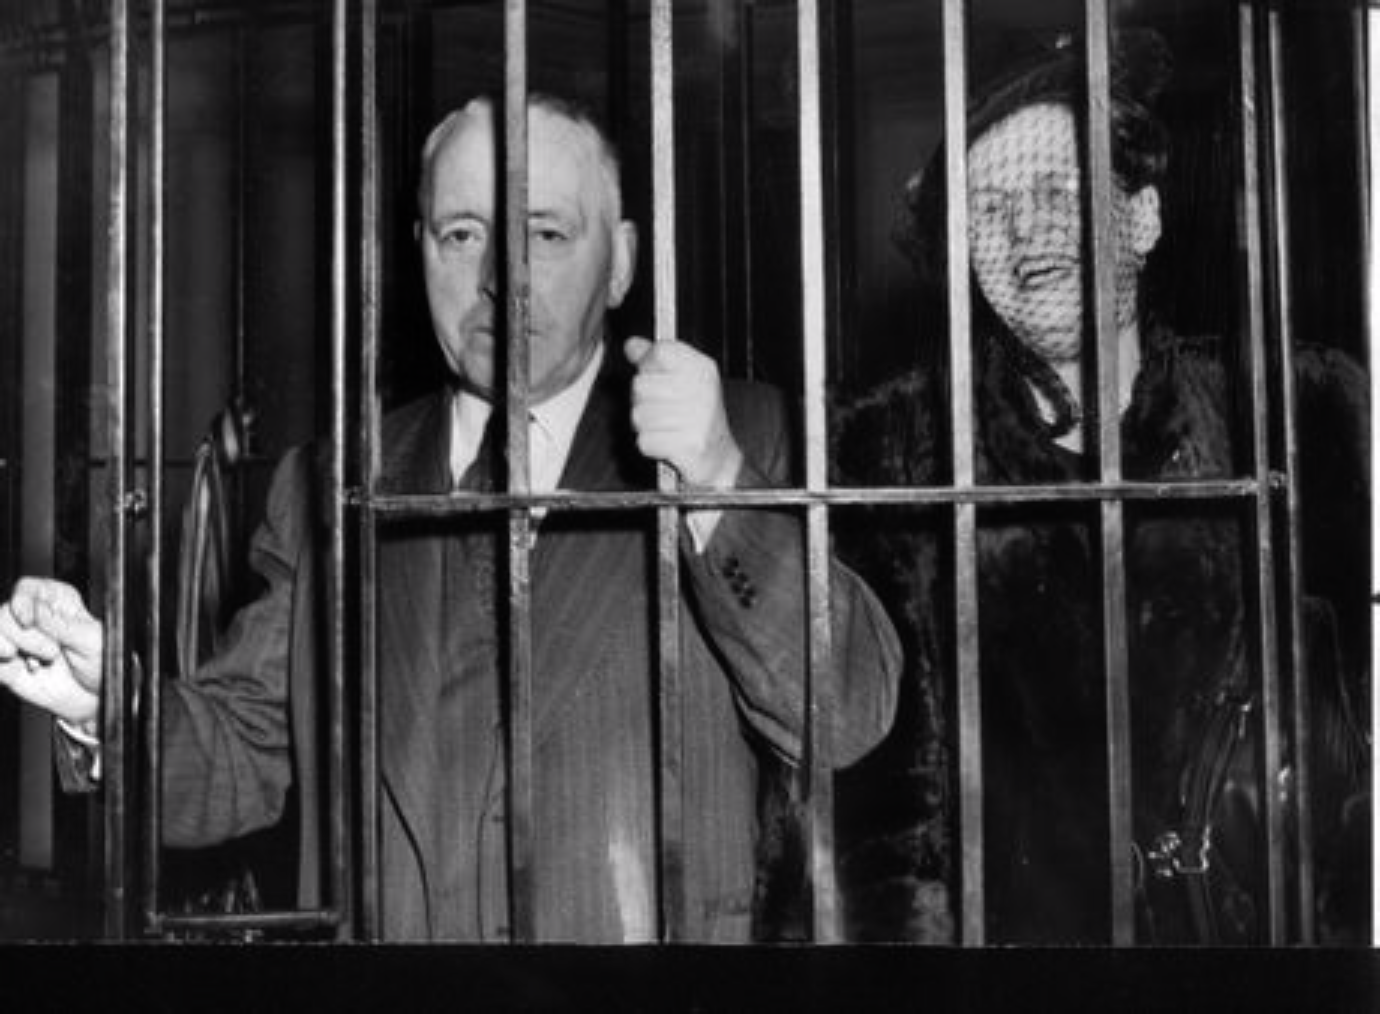 Maisie is on the right and her husband Tom on the left. That’s exactly how the caption identified them on April 11, 1955. The two were arrested for smashing a police padlock on the headquarters of a bootlegger client of Tom’s.